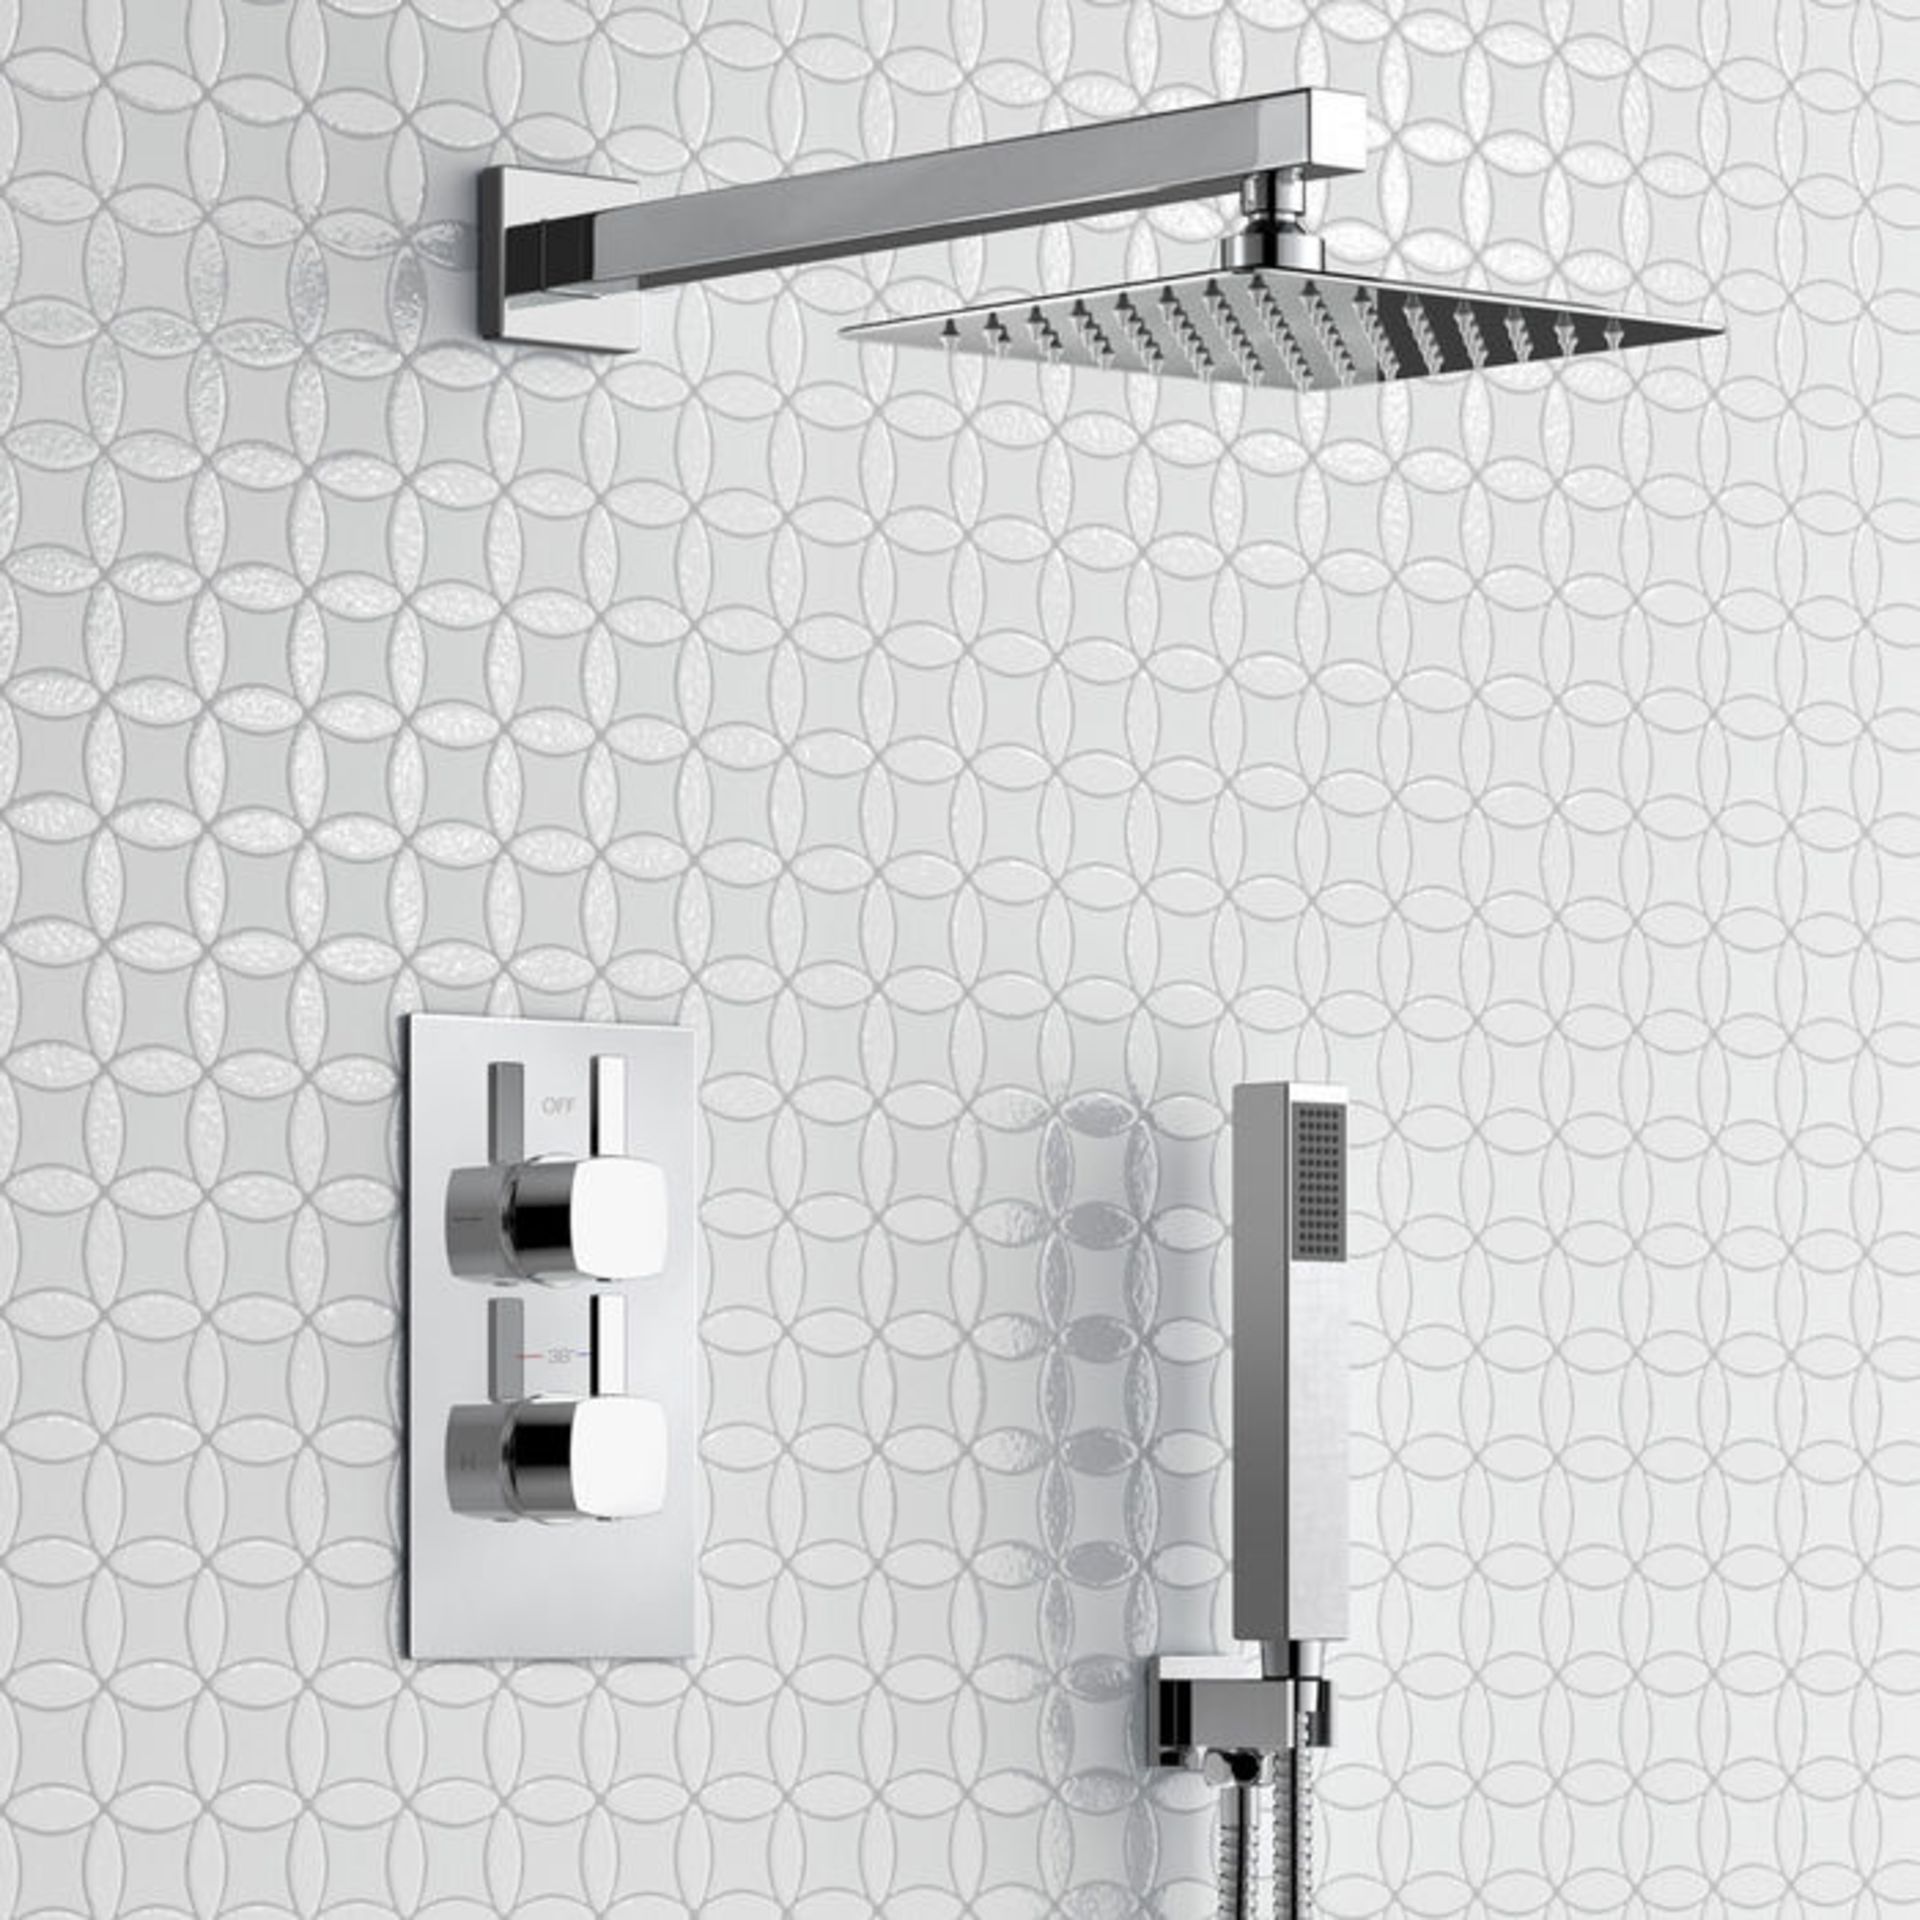 (O53) Square Concealed Thermostatic Mixer Shower Kit & Medium Head. Family friendly detachable - Image 2 of 5